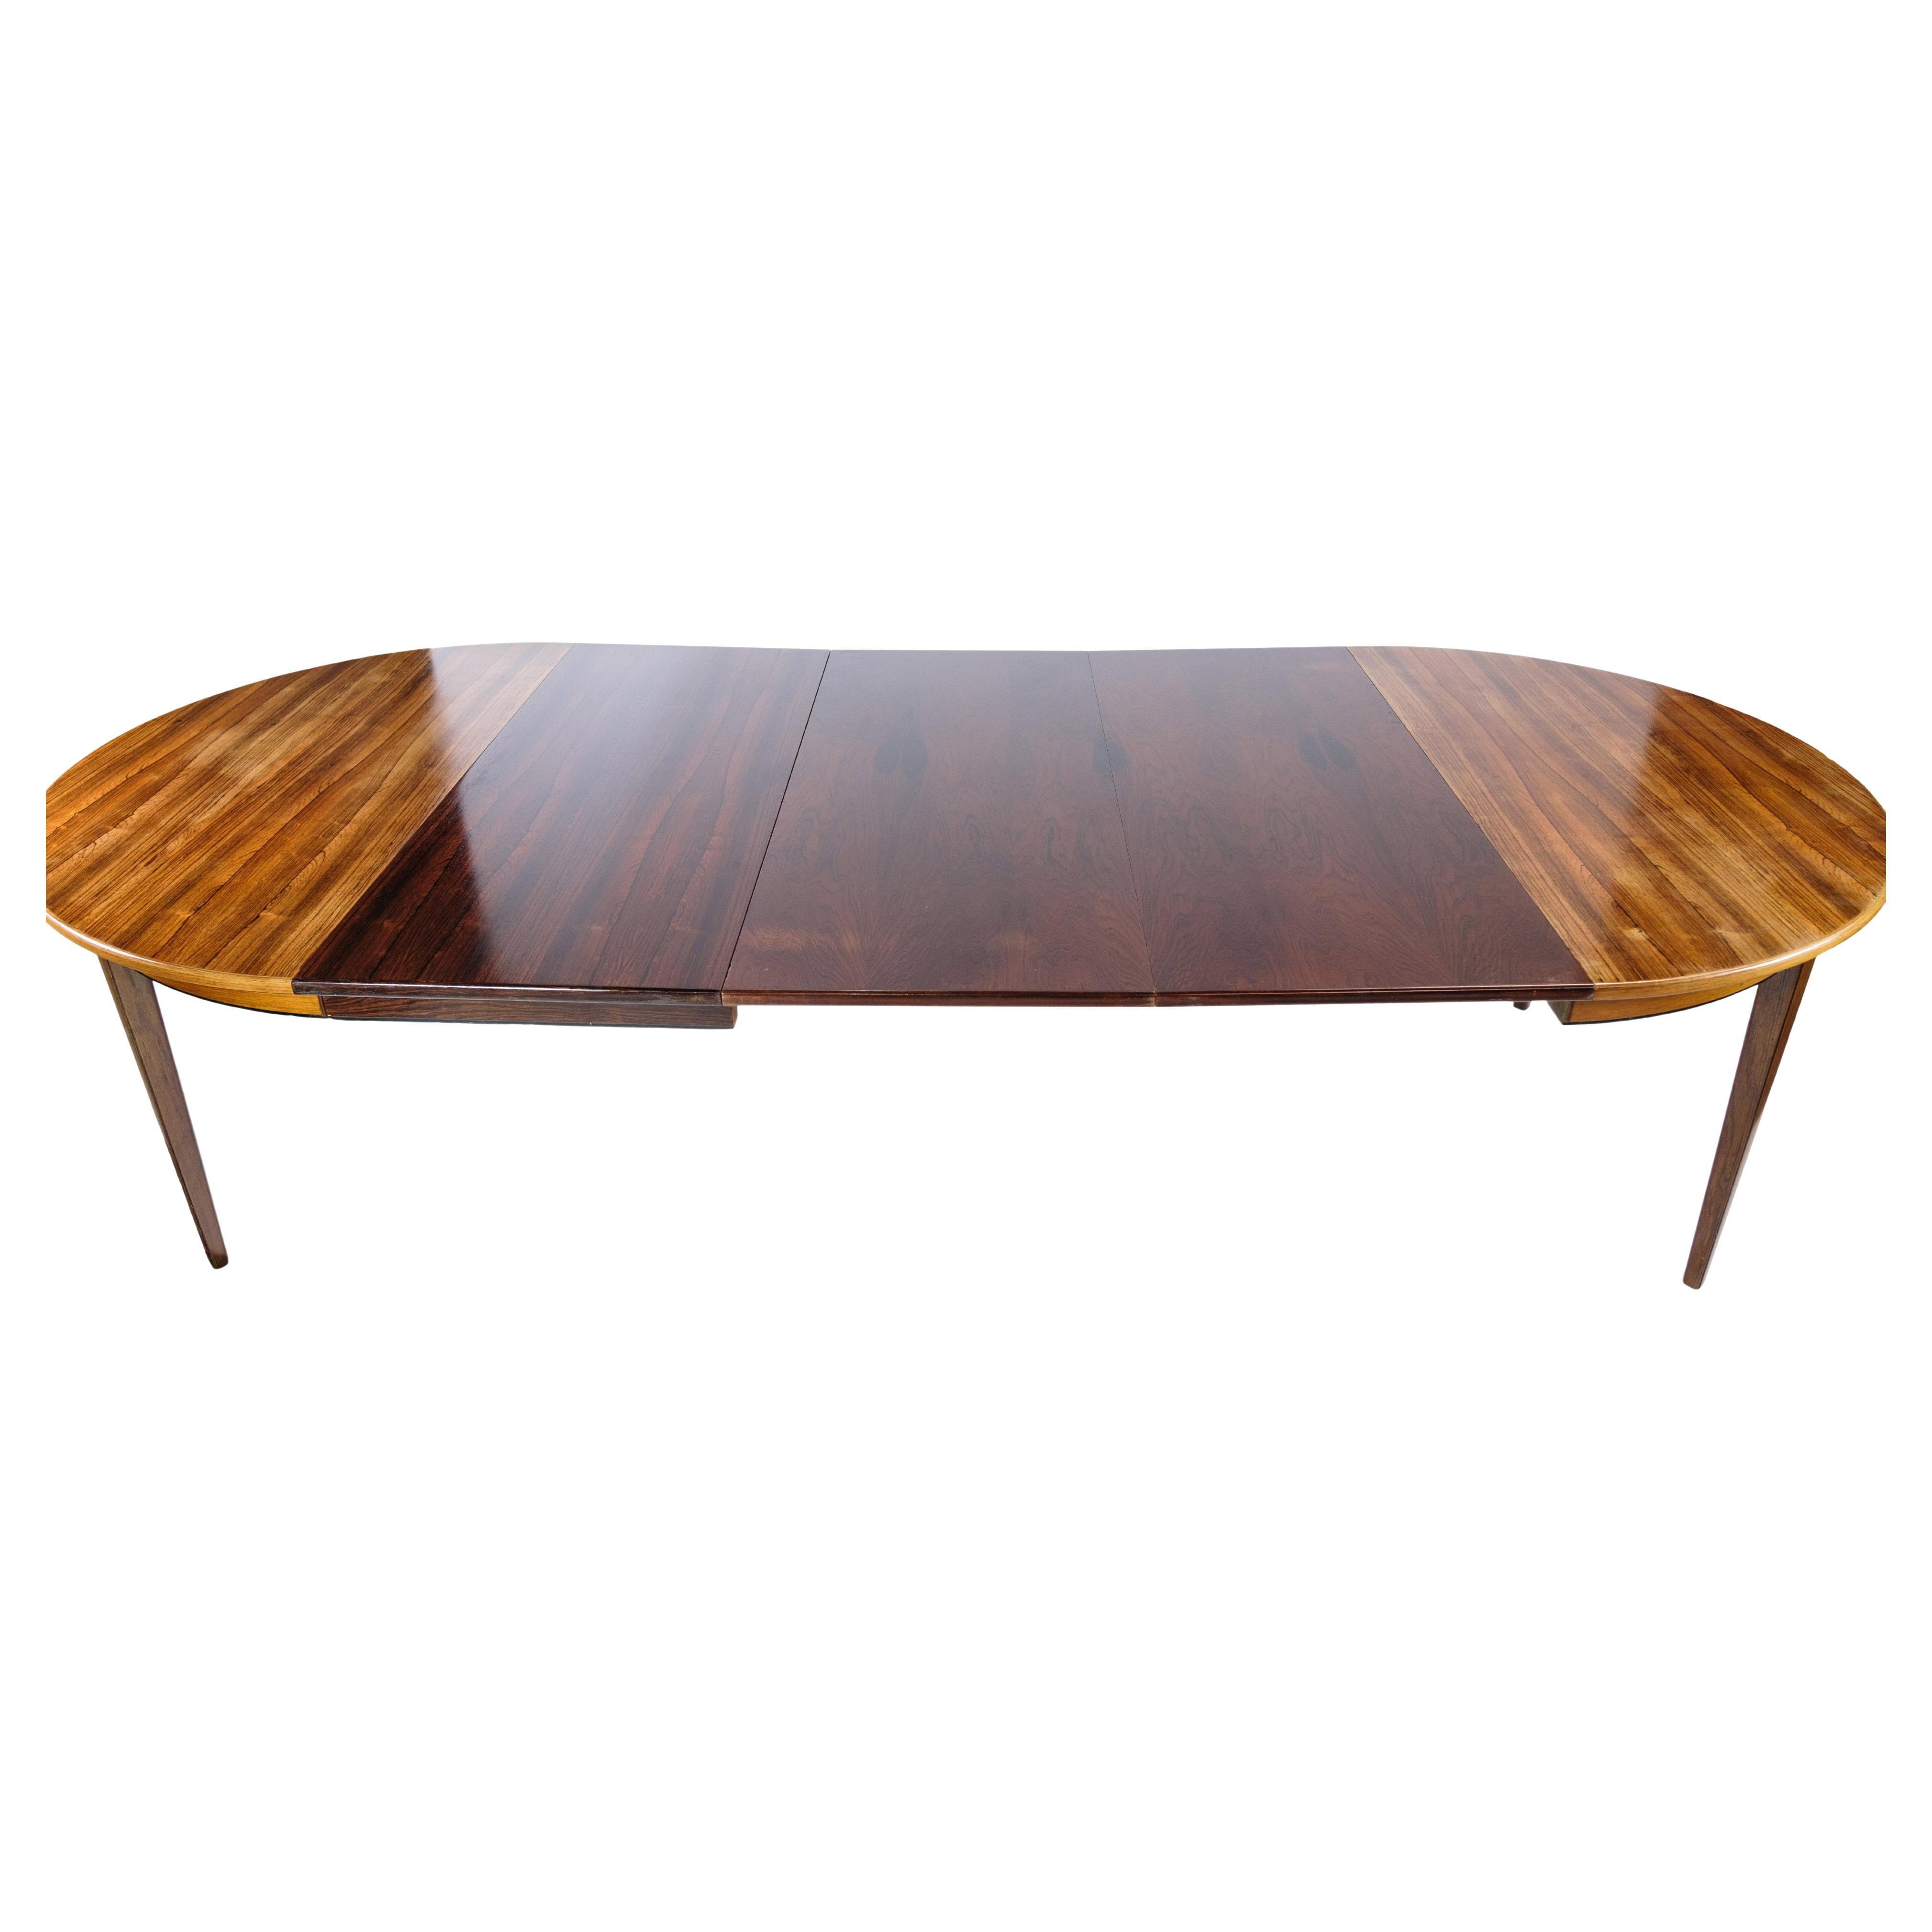 This dining table, designed by Omann Junior in the 1960s, is a beautiful example of mid-century modern design crafted from luxurious rosewood. The table features a rich rosewood veneer, known for its deep, warm tones and intricate grain patterns,